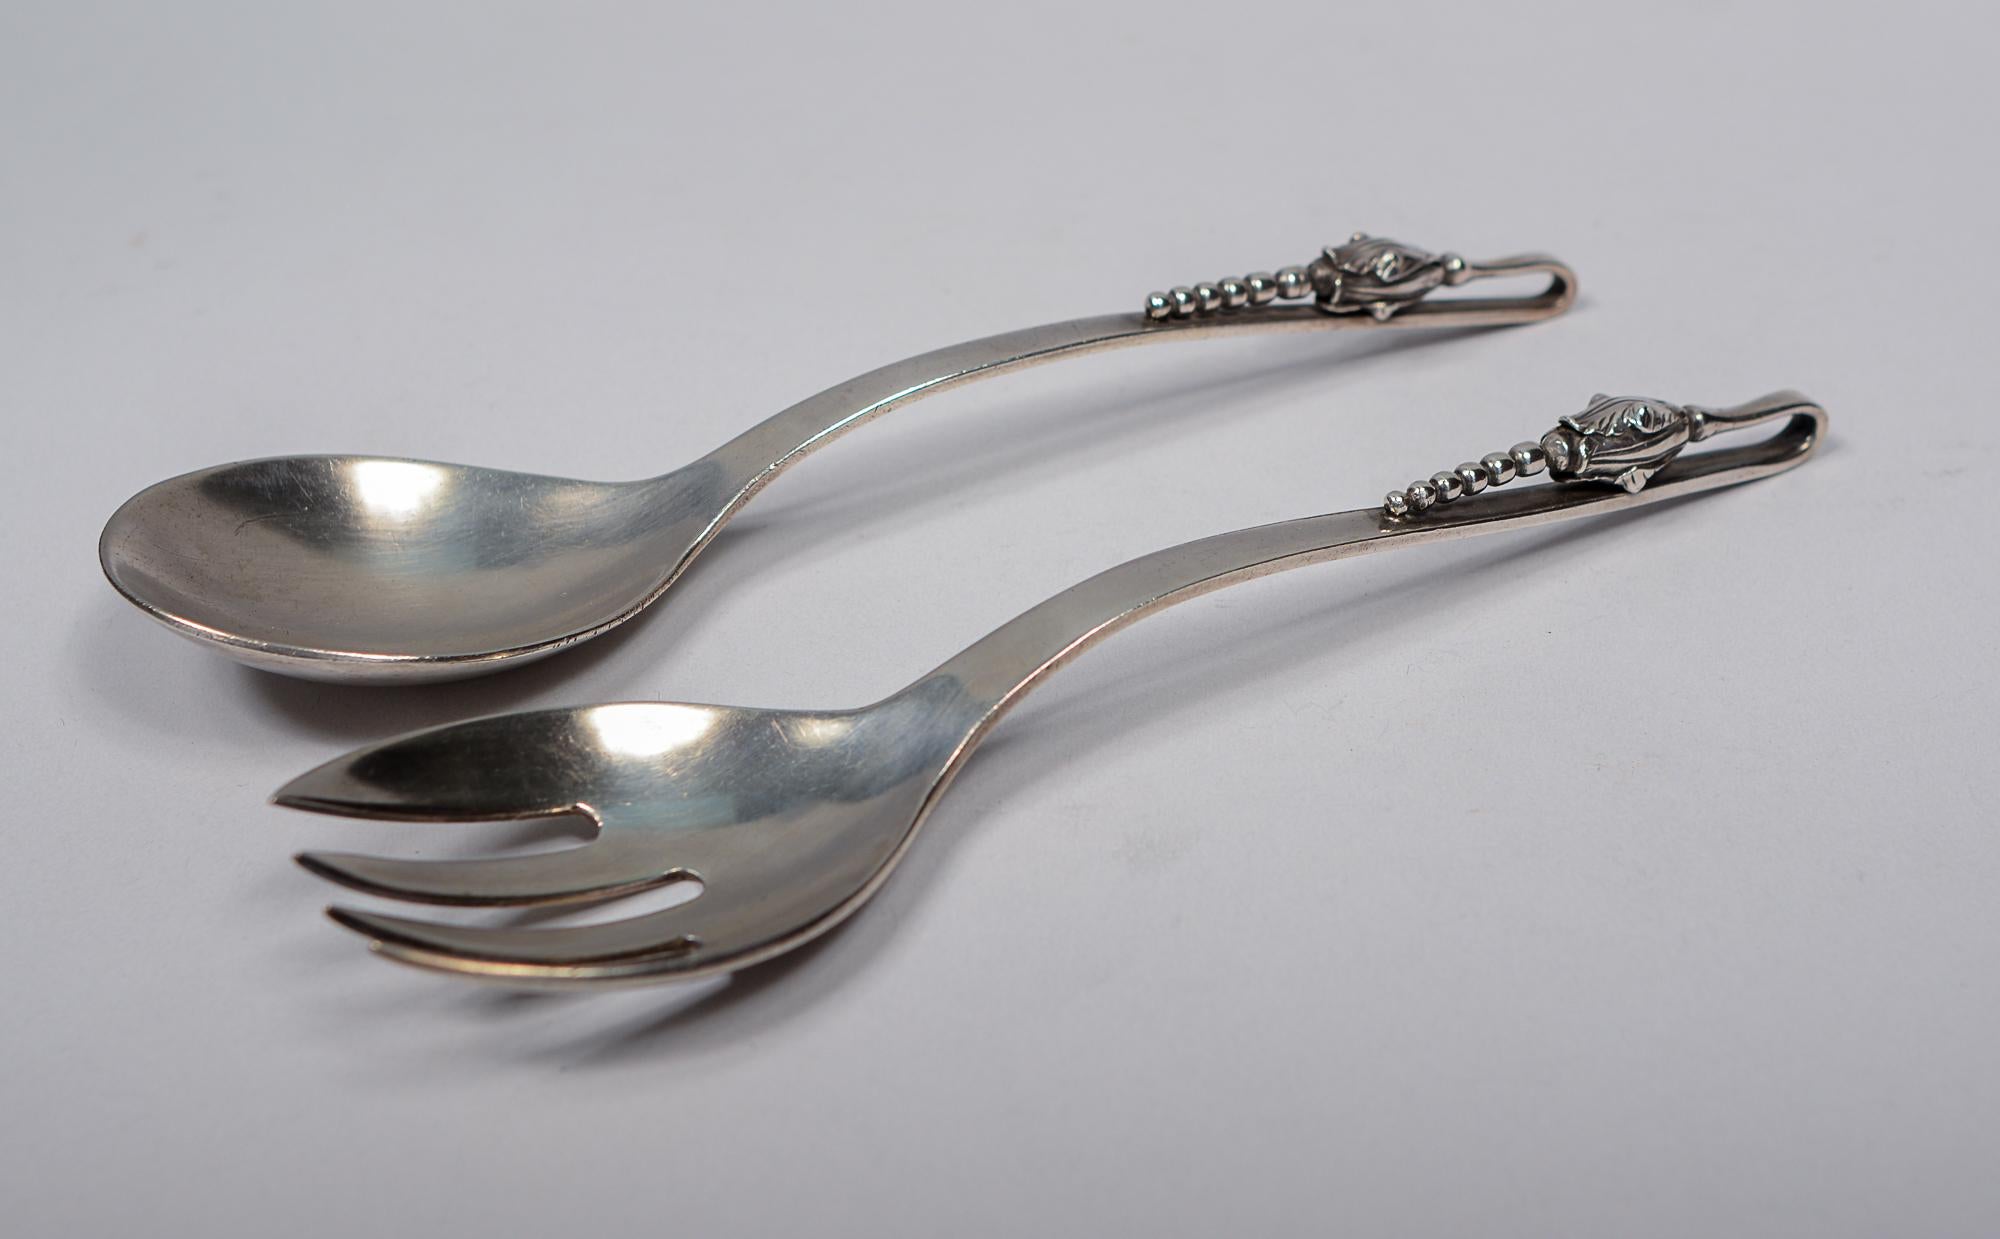 Pair of sterling silver servers by Sanborns of Mexico. These have an art nouveau Scandinavian style design. These have a lot of weight. They were used and have nicks on the edges and scratches.